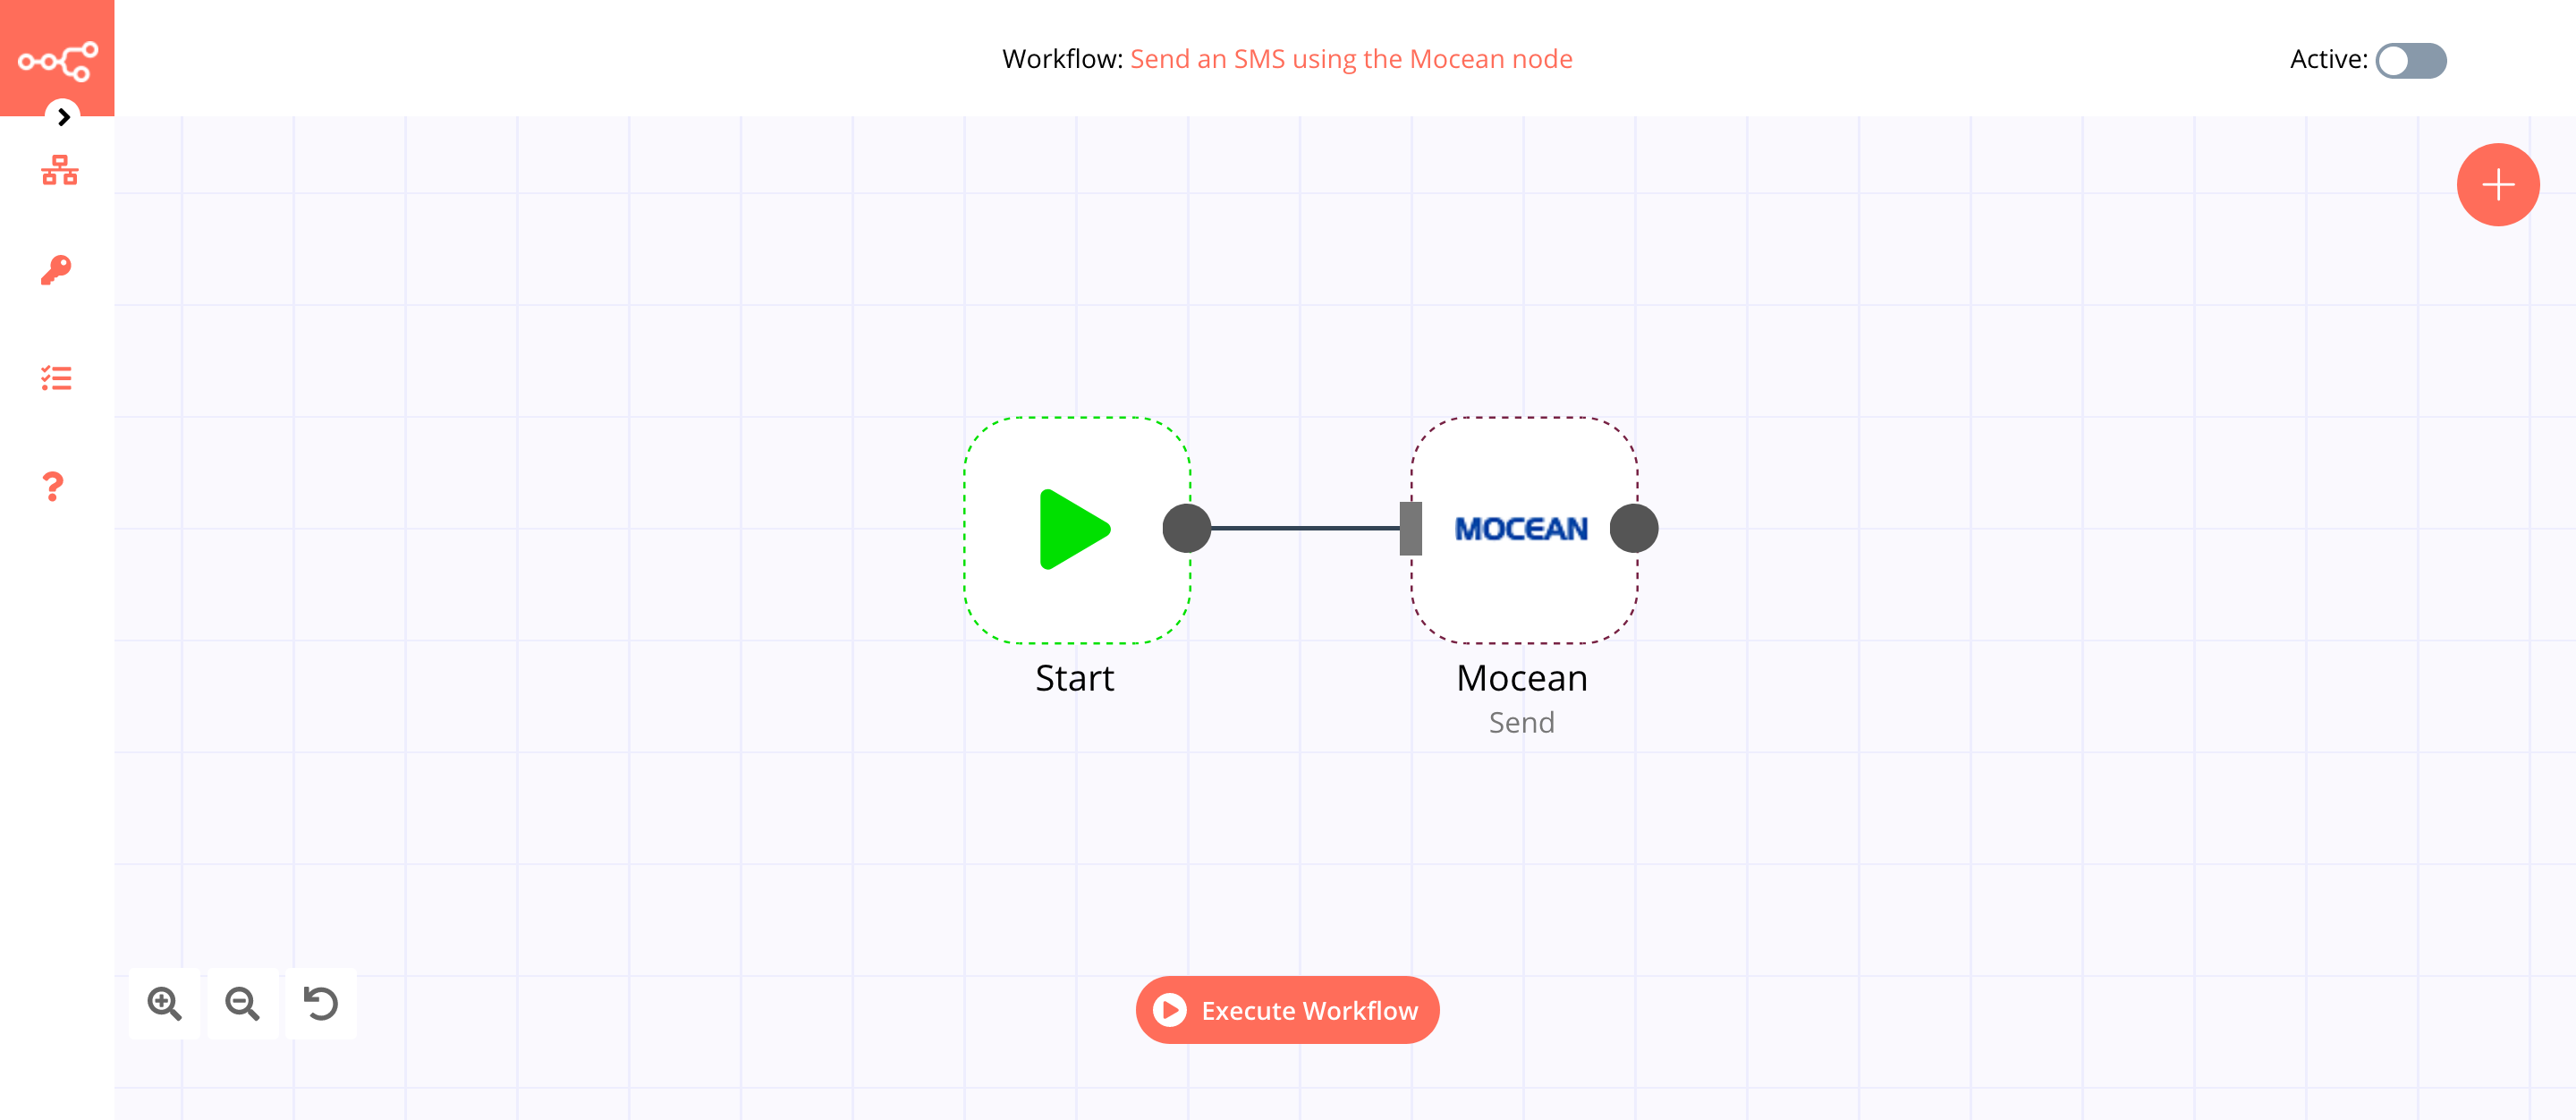 A workflow with the Mocean node